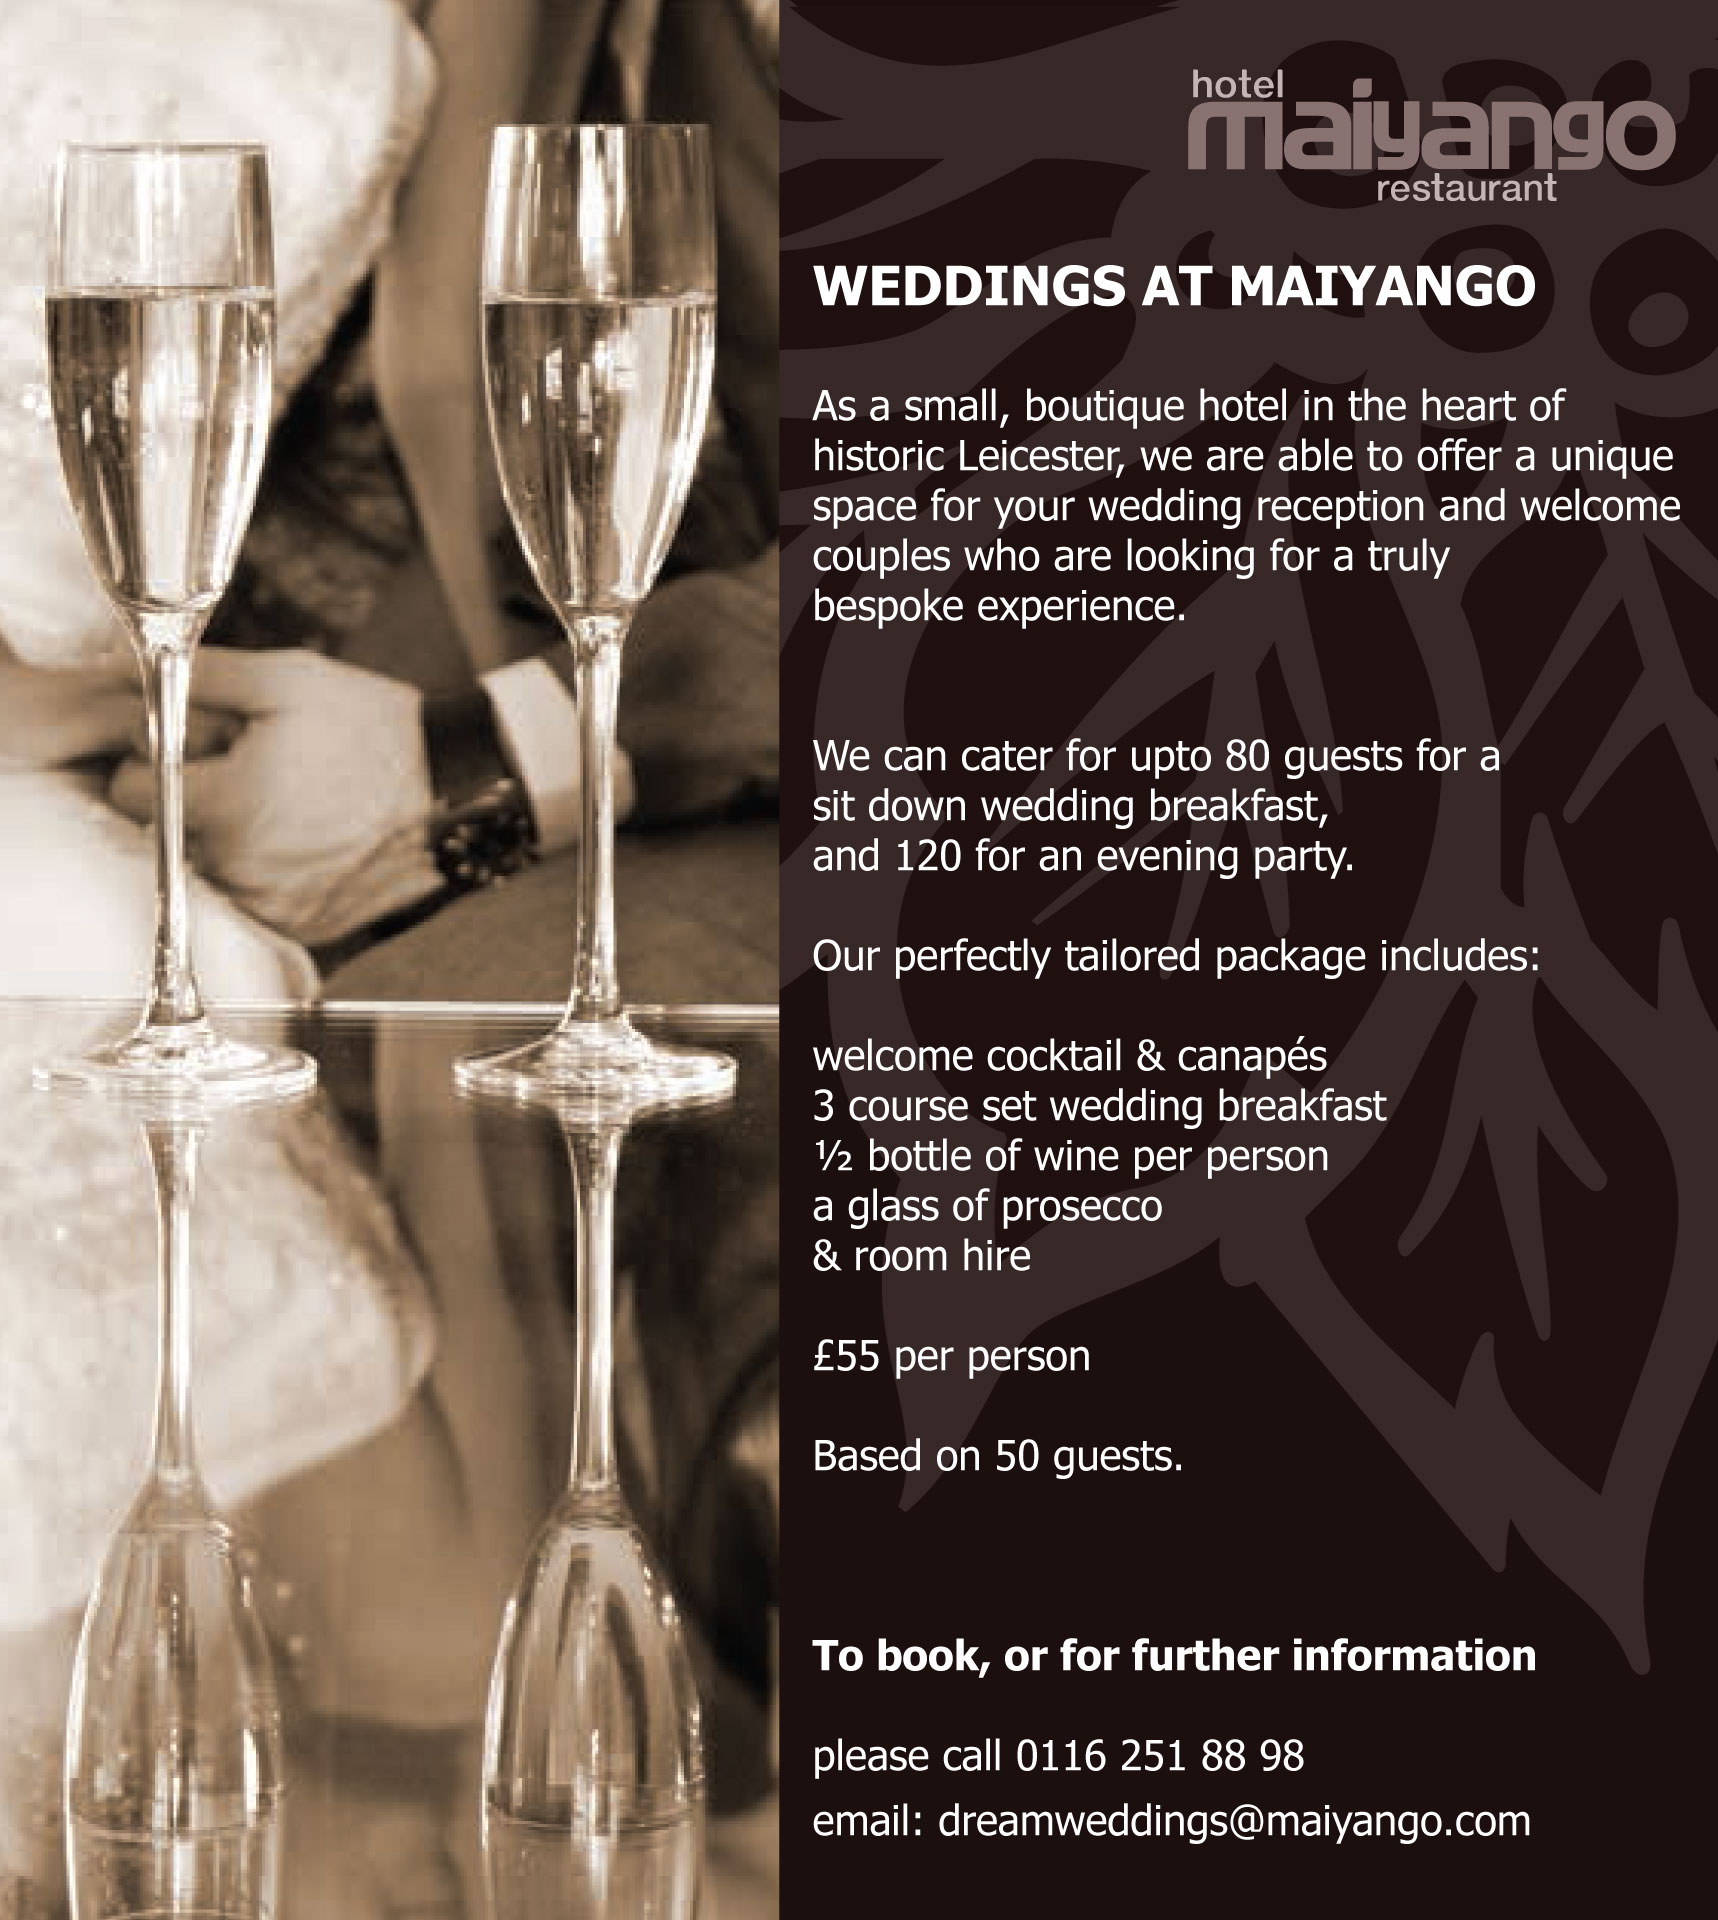 Celebrations and restaurant offers at Maiyango restaurant